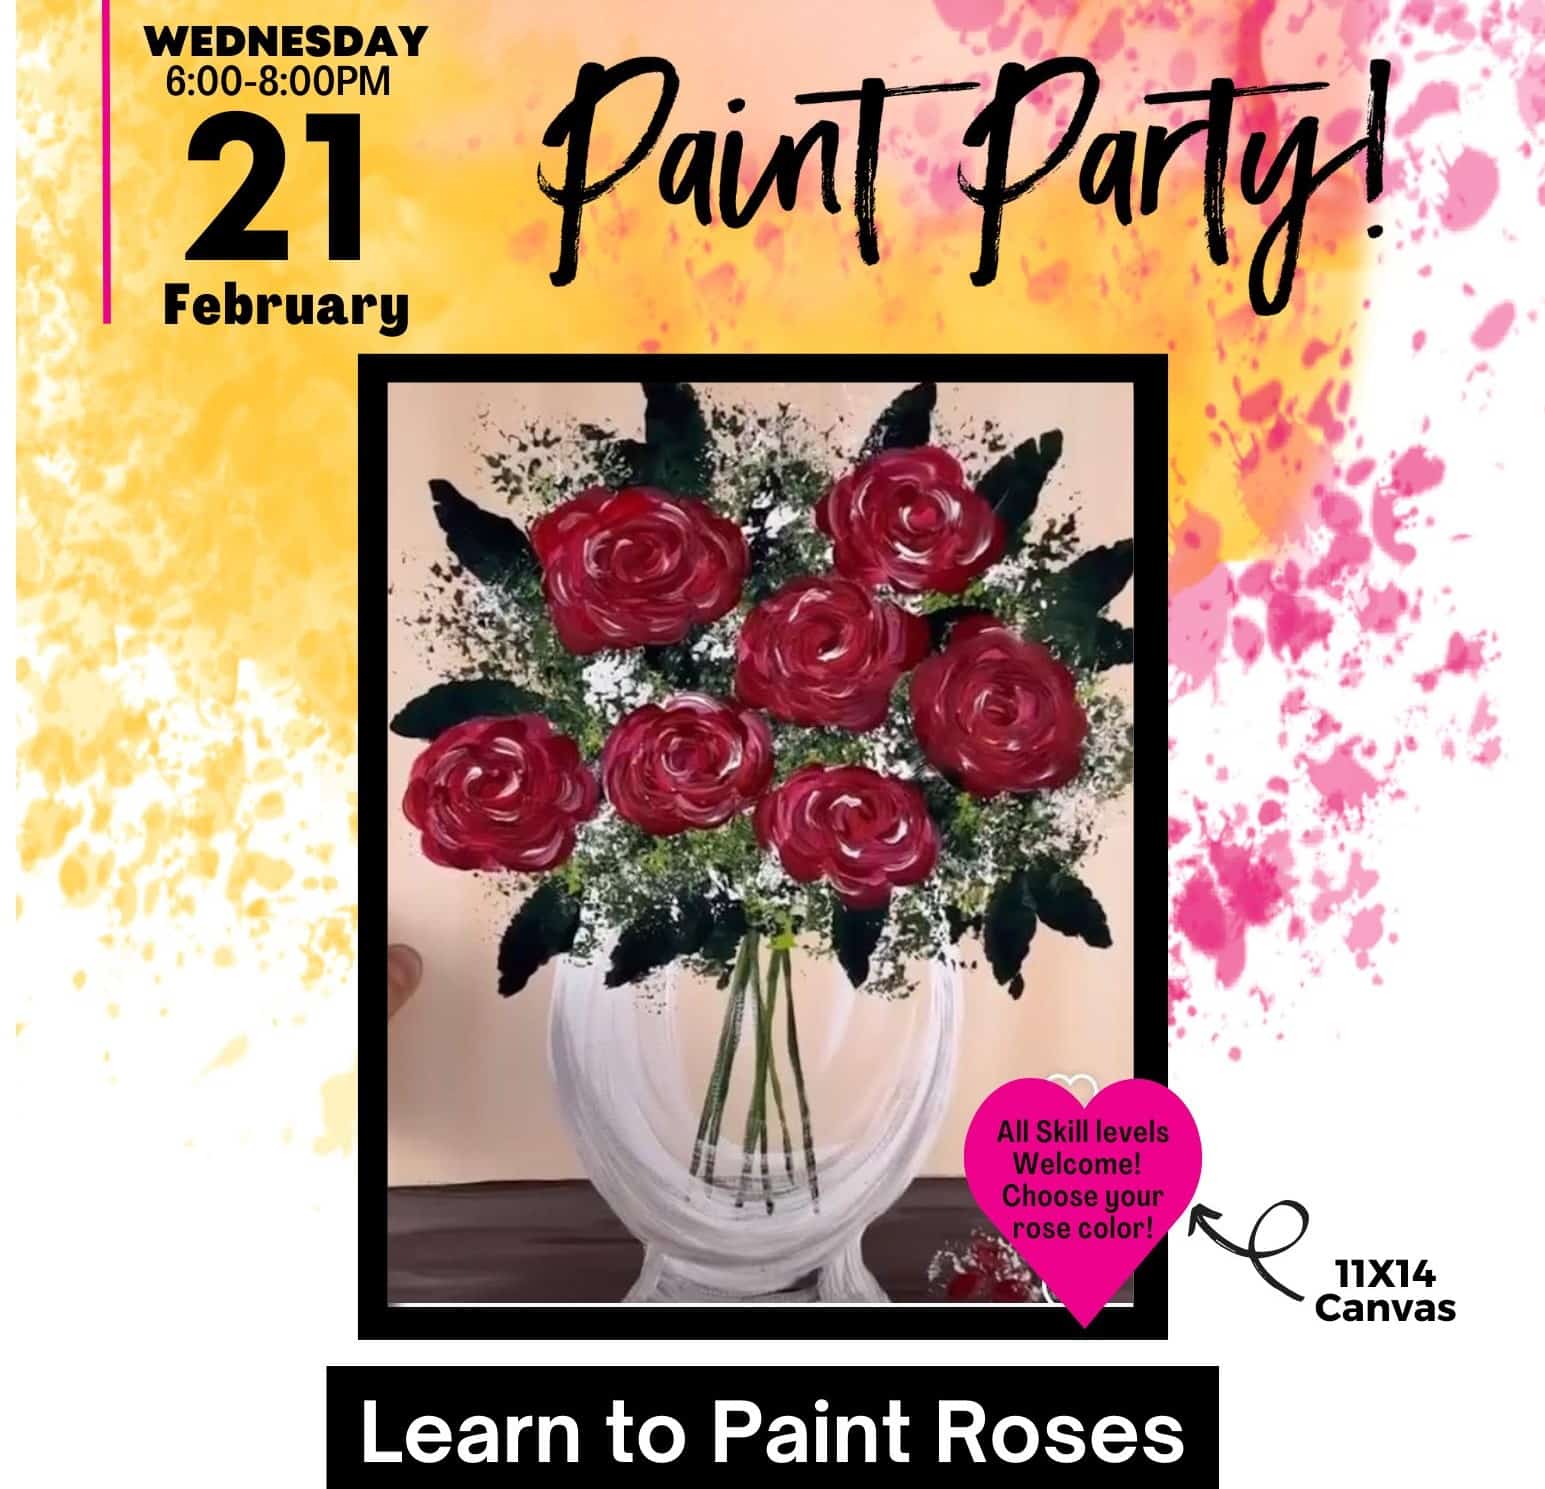 🌹 Paint and Sip with Artist Holly Adkins: Learn to Paint Roses 🌹